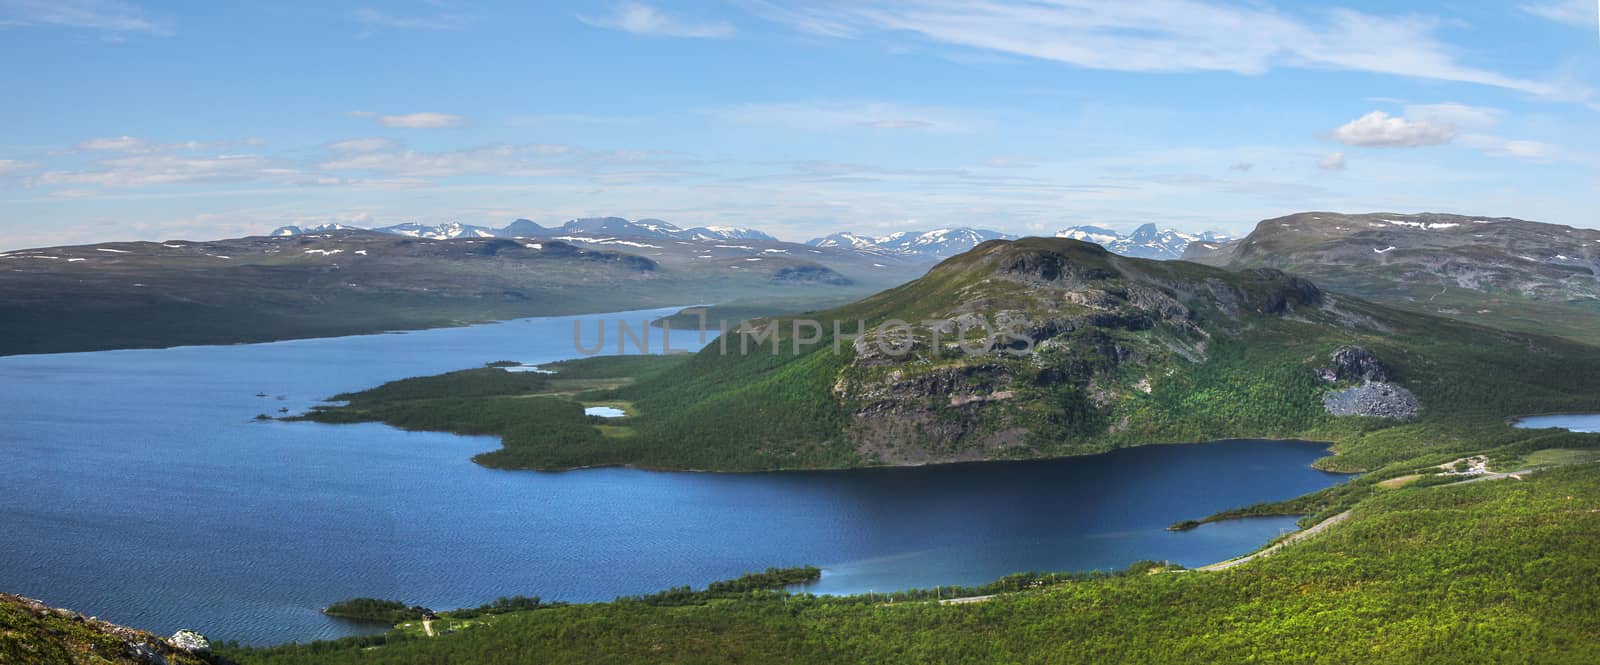 Panorama of Lake Kilpisjarvi and Malla fells in Finnish Lapland by anterovium